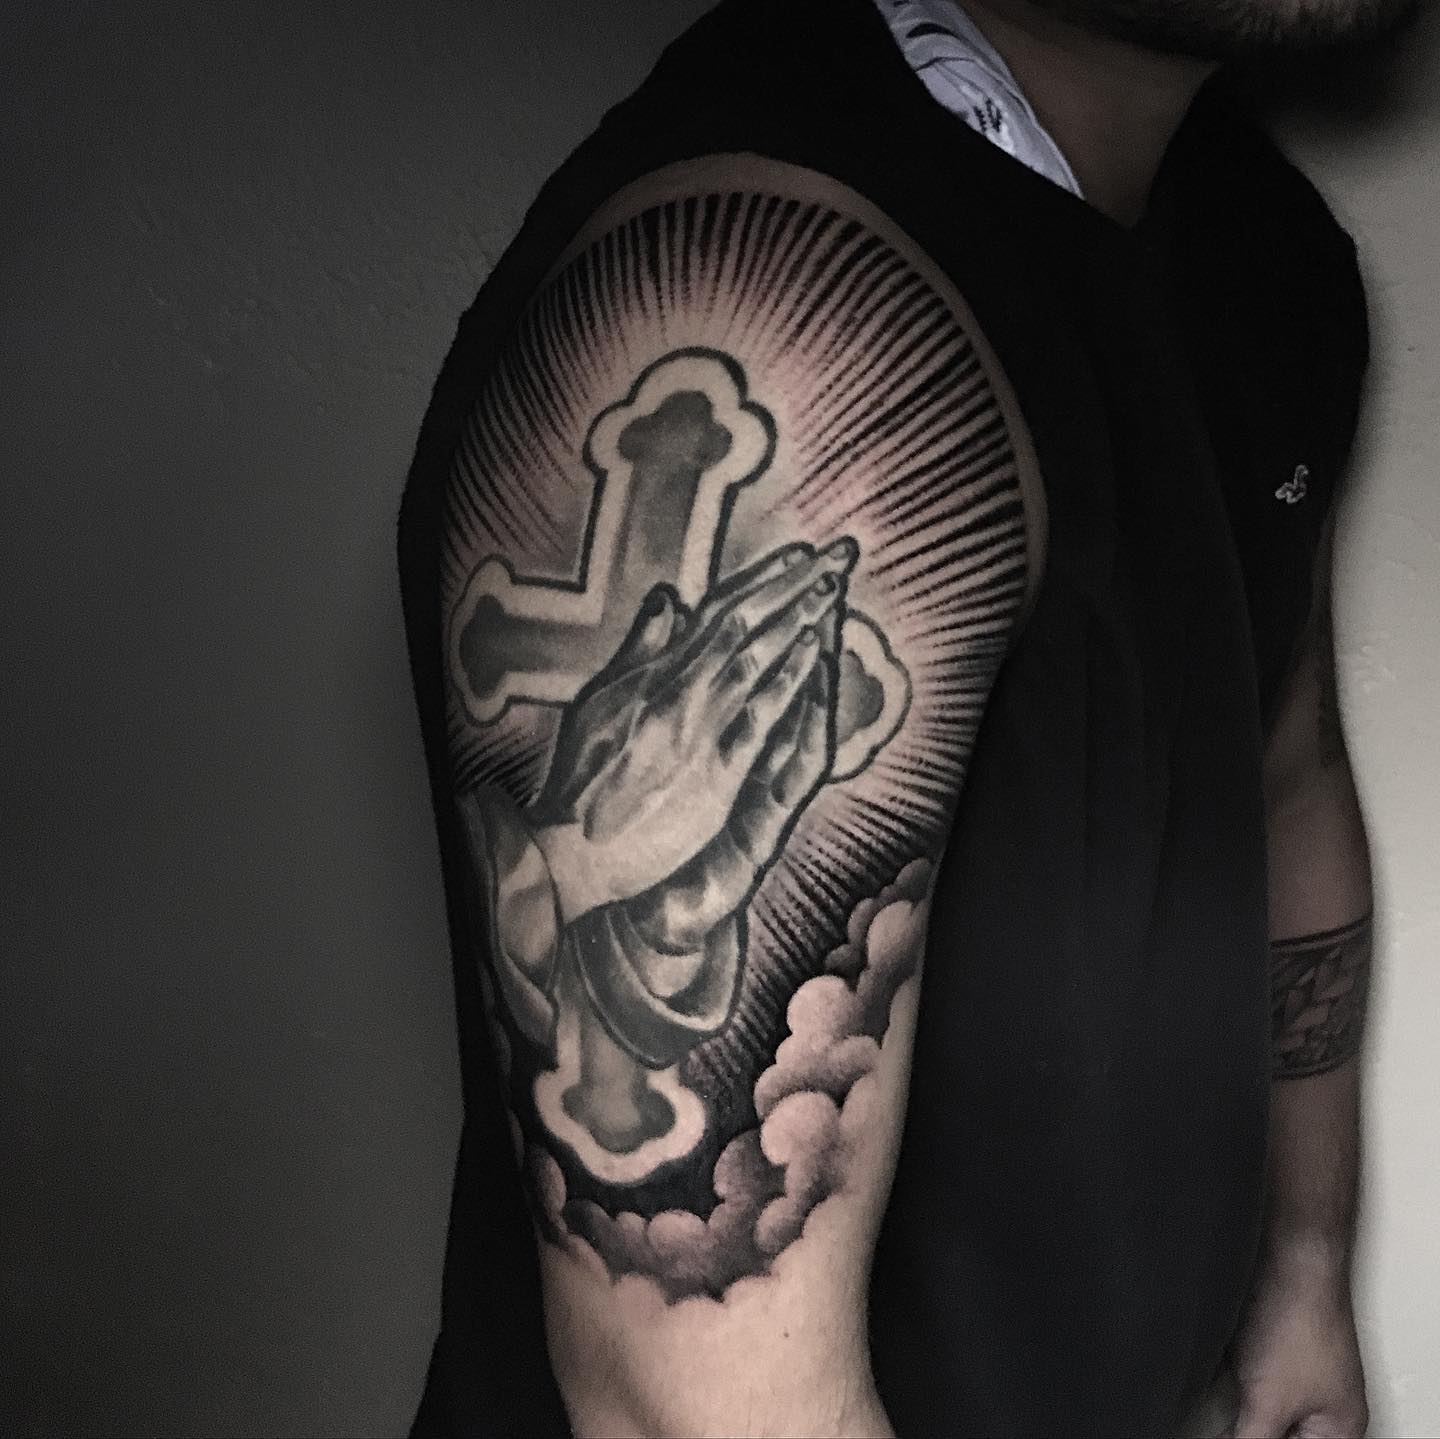 This realistic tattoo will show your devotion to your faith. A big cross will amaze everyone with praying hands on it.